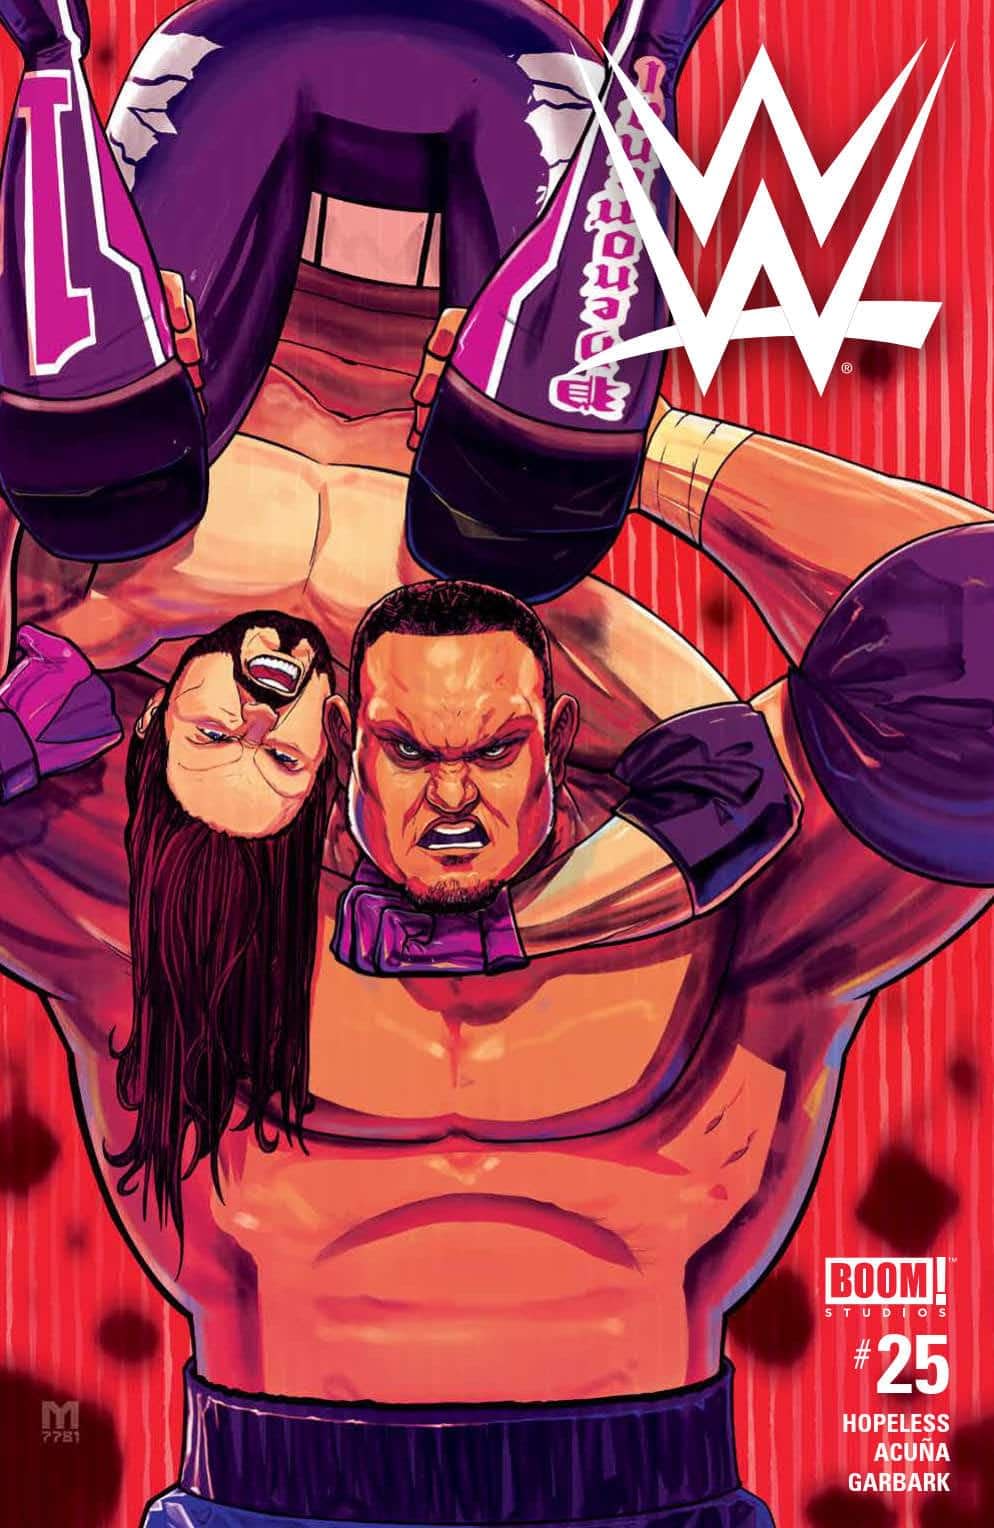 Even in Their Comic Book, WWE is Worried About Talent Leaving for AEW